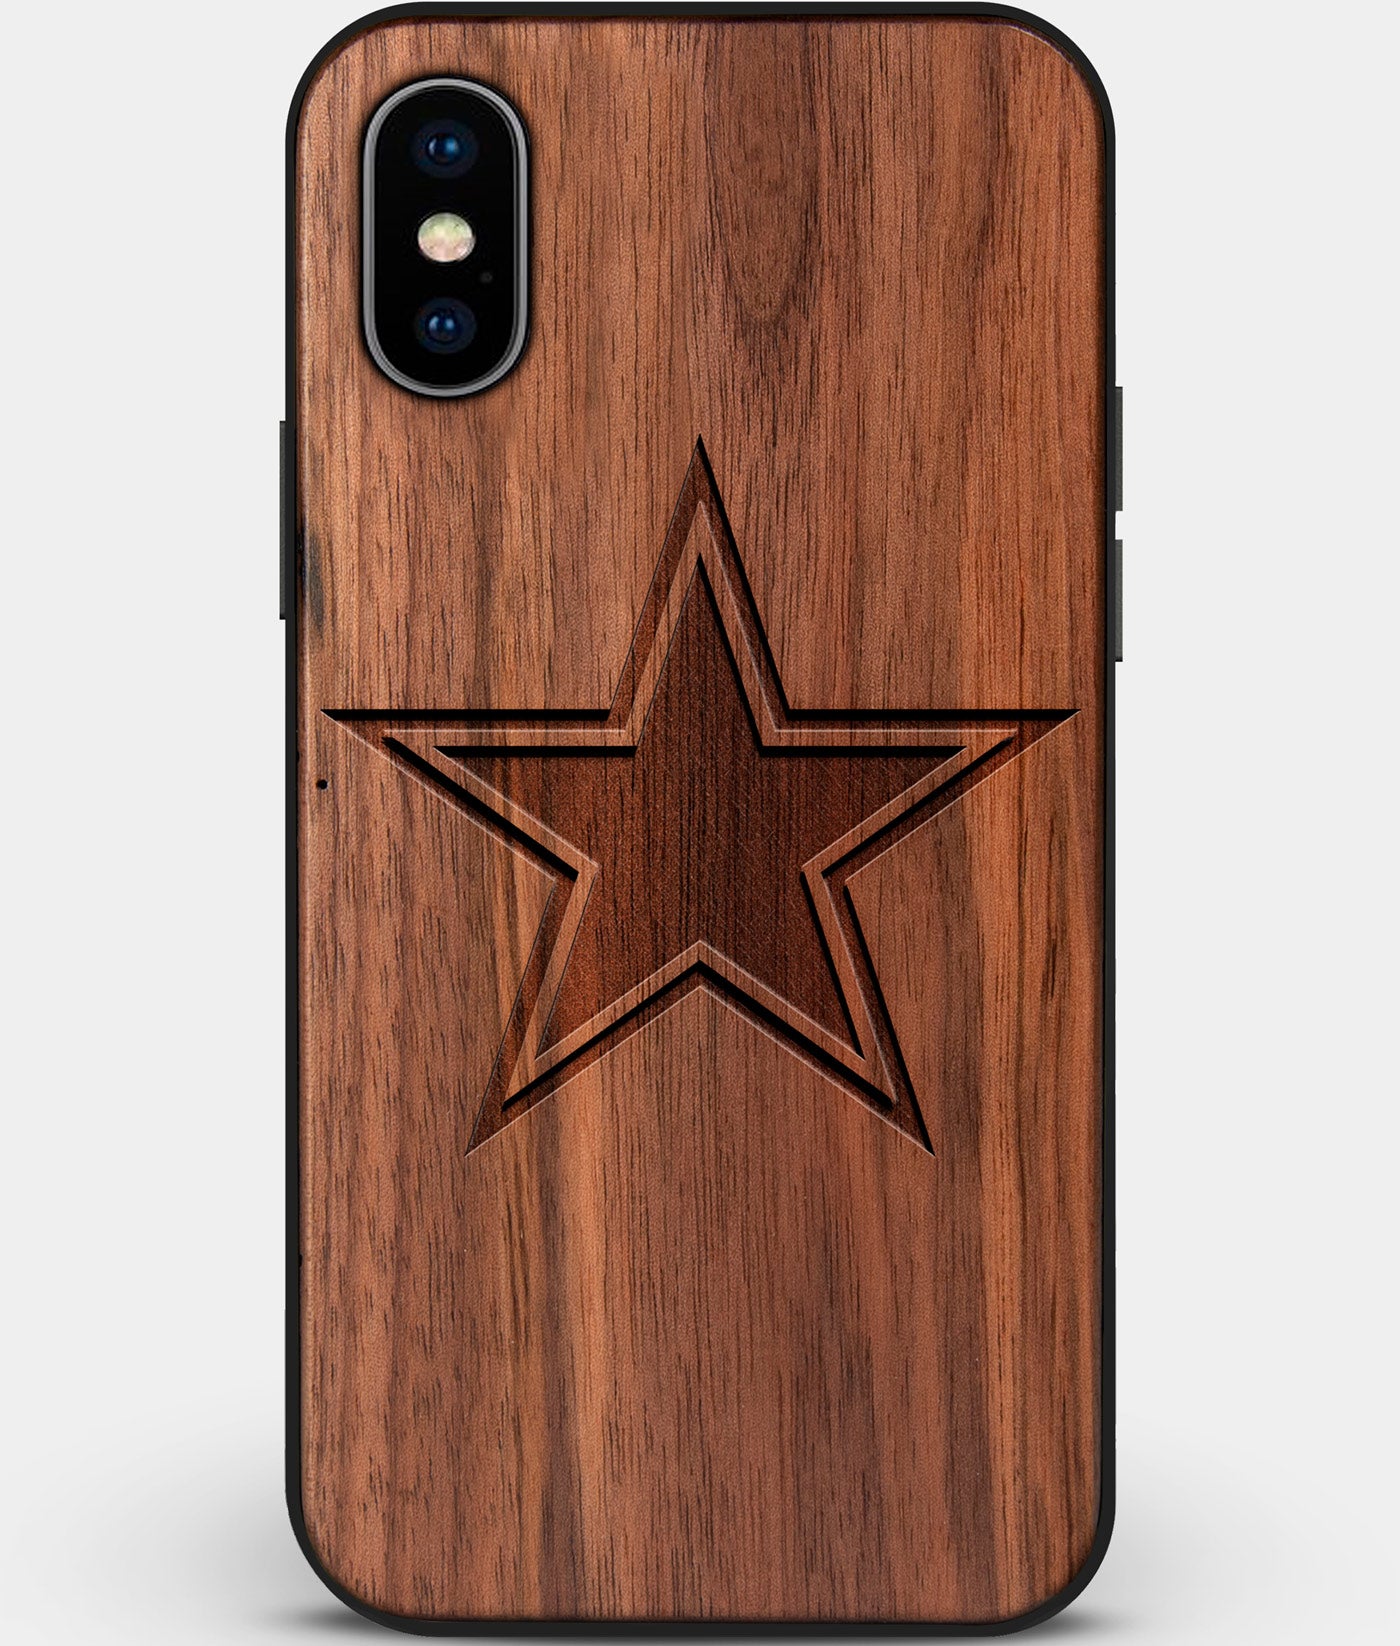 Custom Carved Wood Dallas Cowboys iPhone XS Max Case | Personalized Walnut Wood Dallas Cowboys Cover, Birthday Gift, Gifts For Him, Monogrammed Gift For Fan | by Engraved In Nature